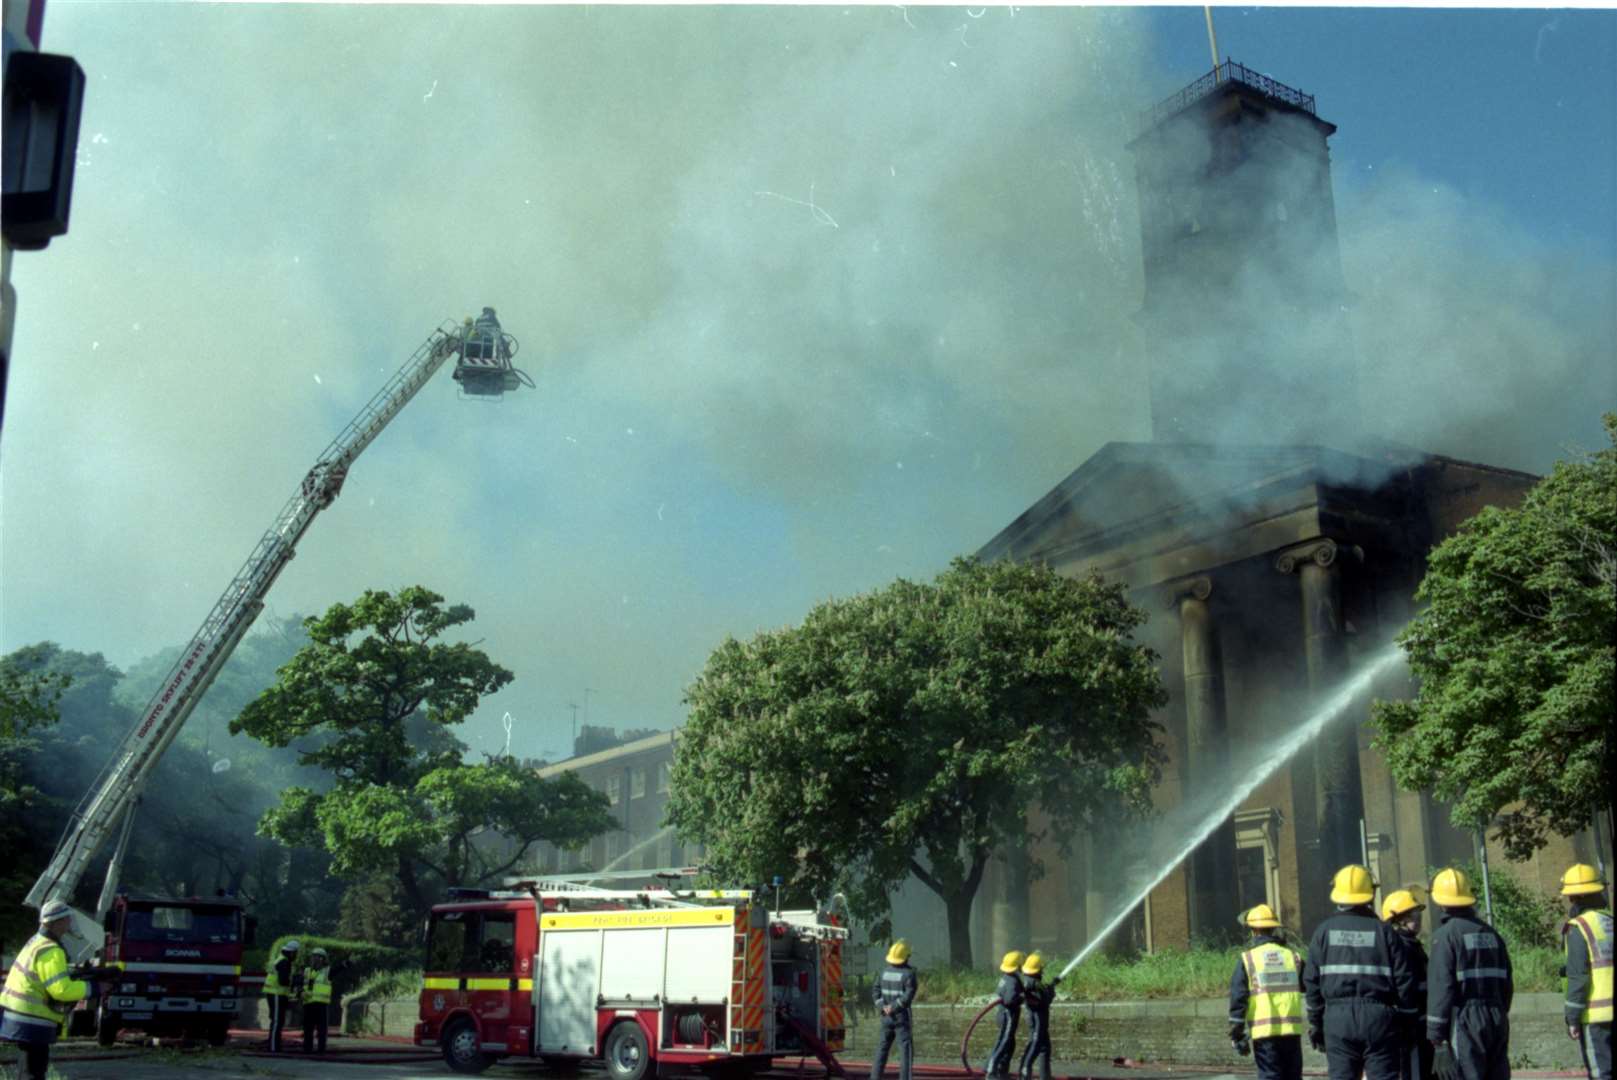 Fighting the fire in May, 2001